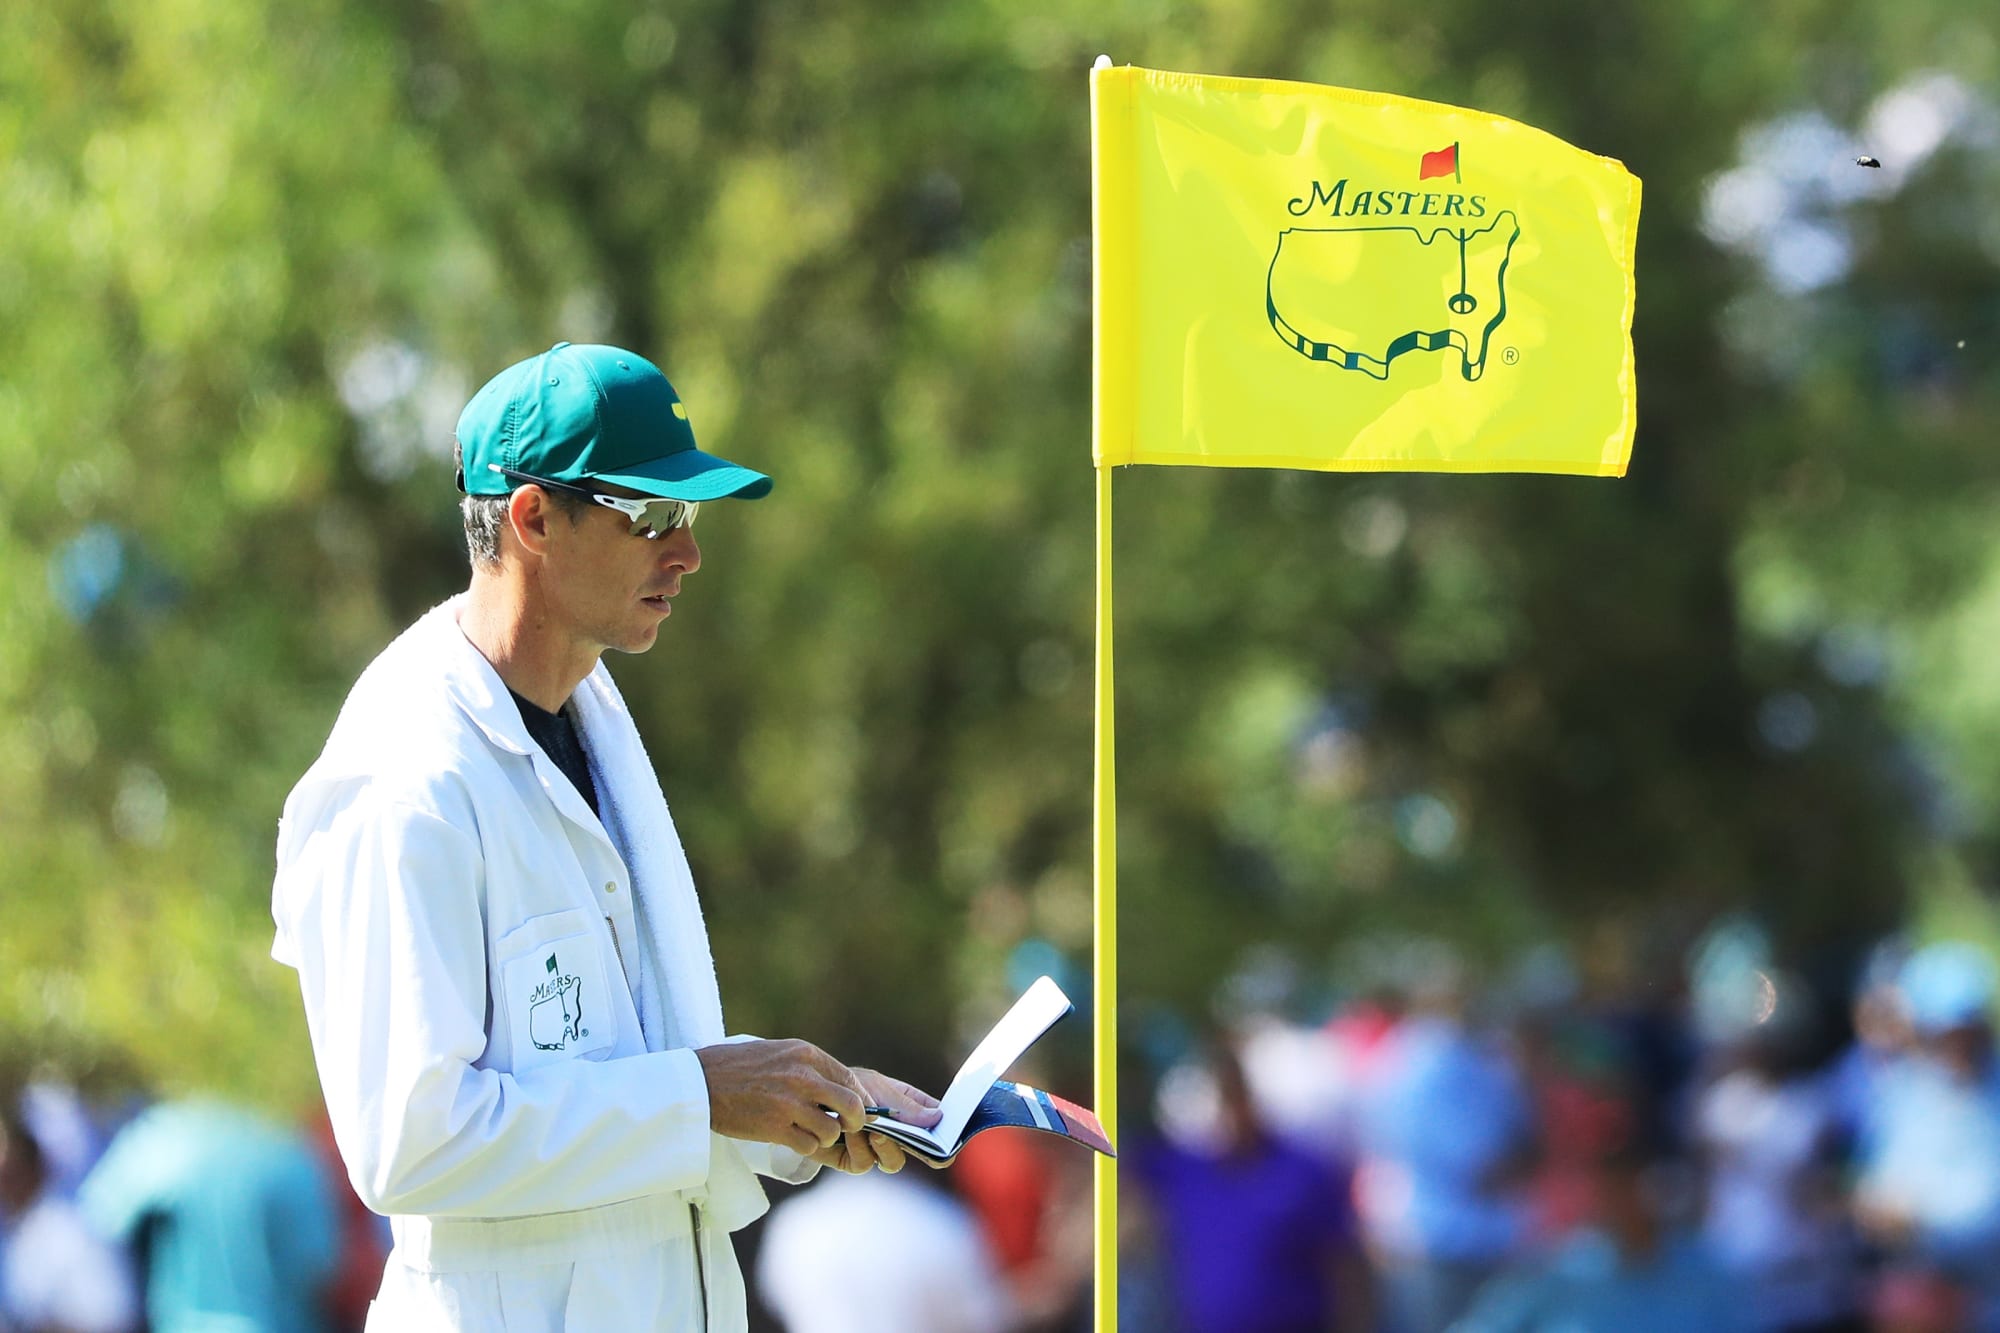 The Masters 2018 Breakdown of the prize money